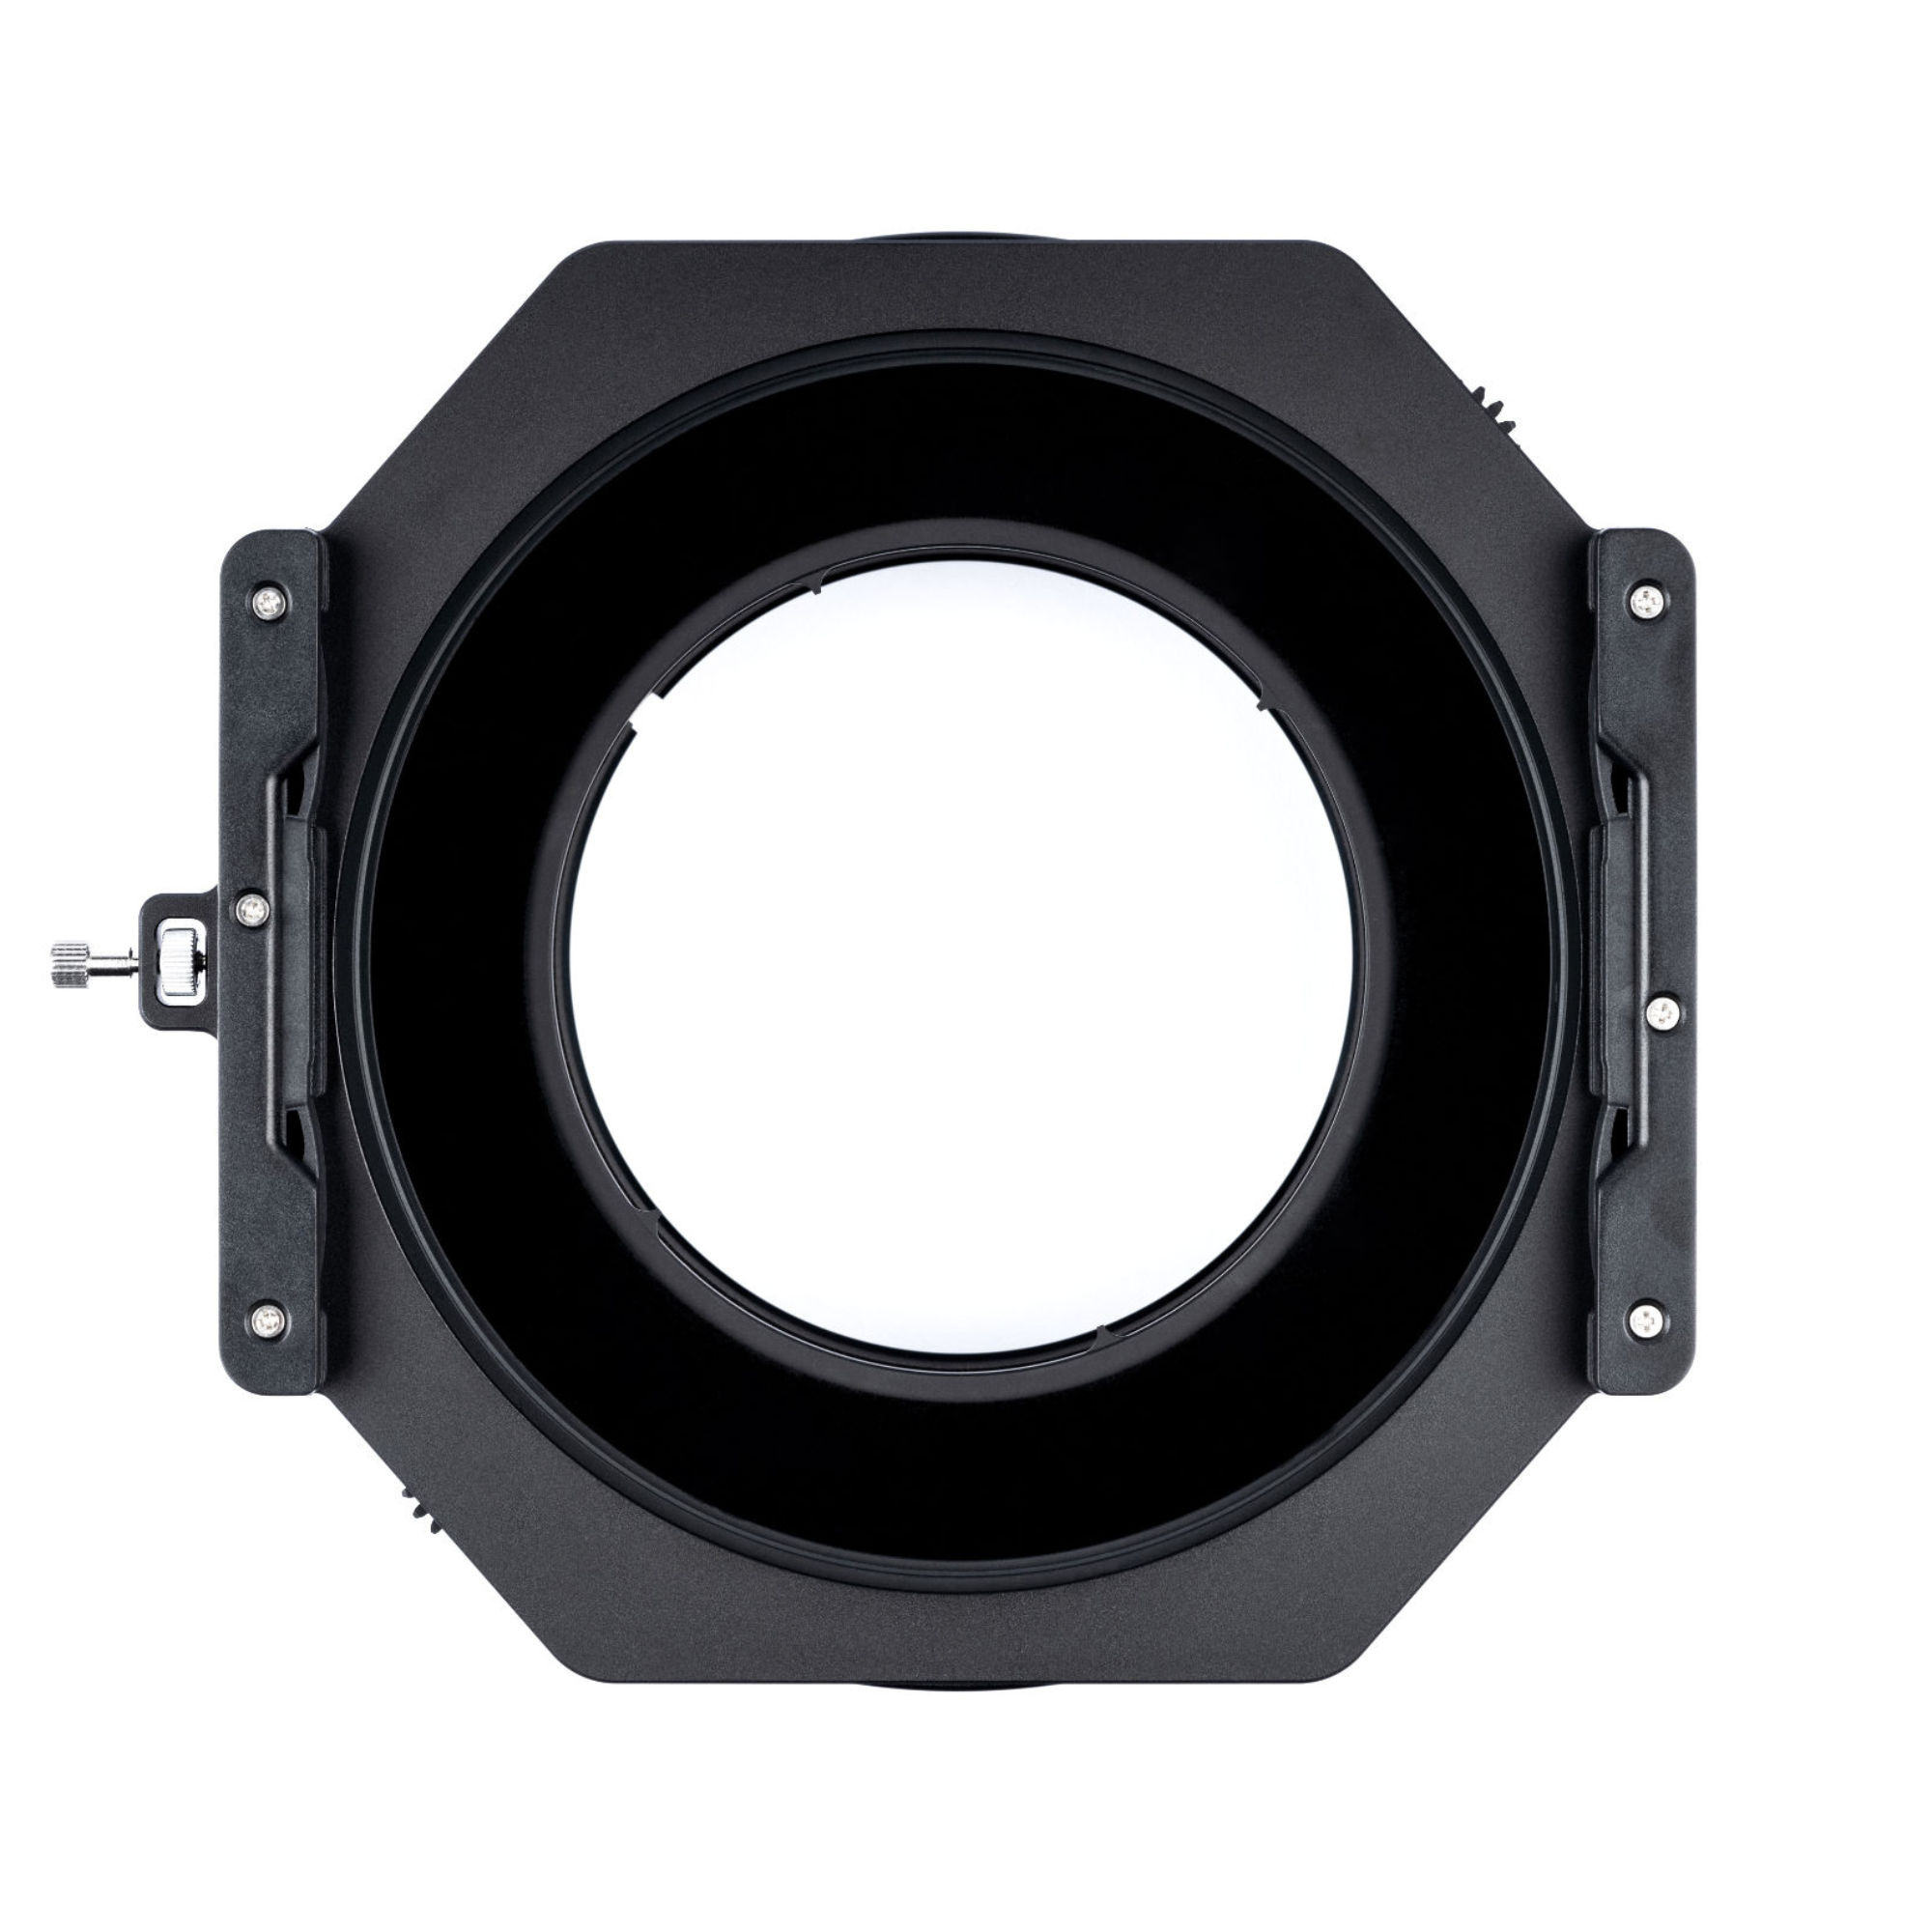 NiSi S6 ALPHA 150mm Filter Holder and Case for Sigma 14-24mm f/2.8 DG DN Art (Sony E and Leica L)